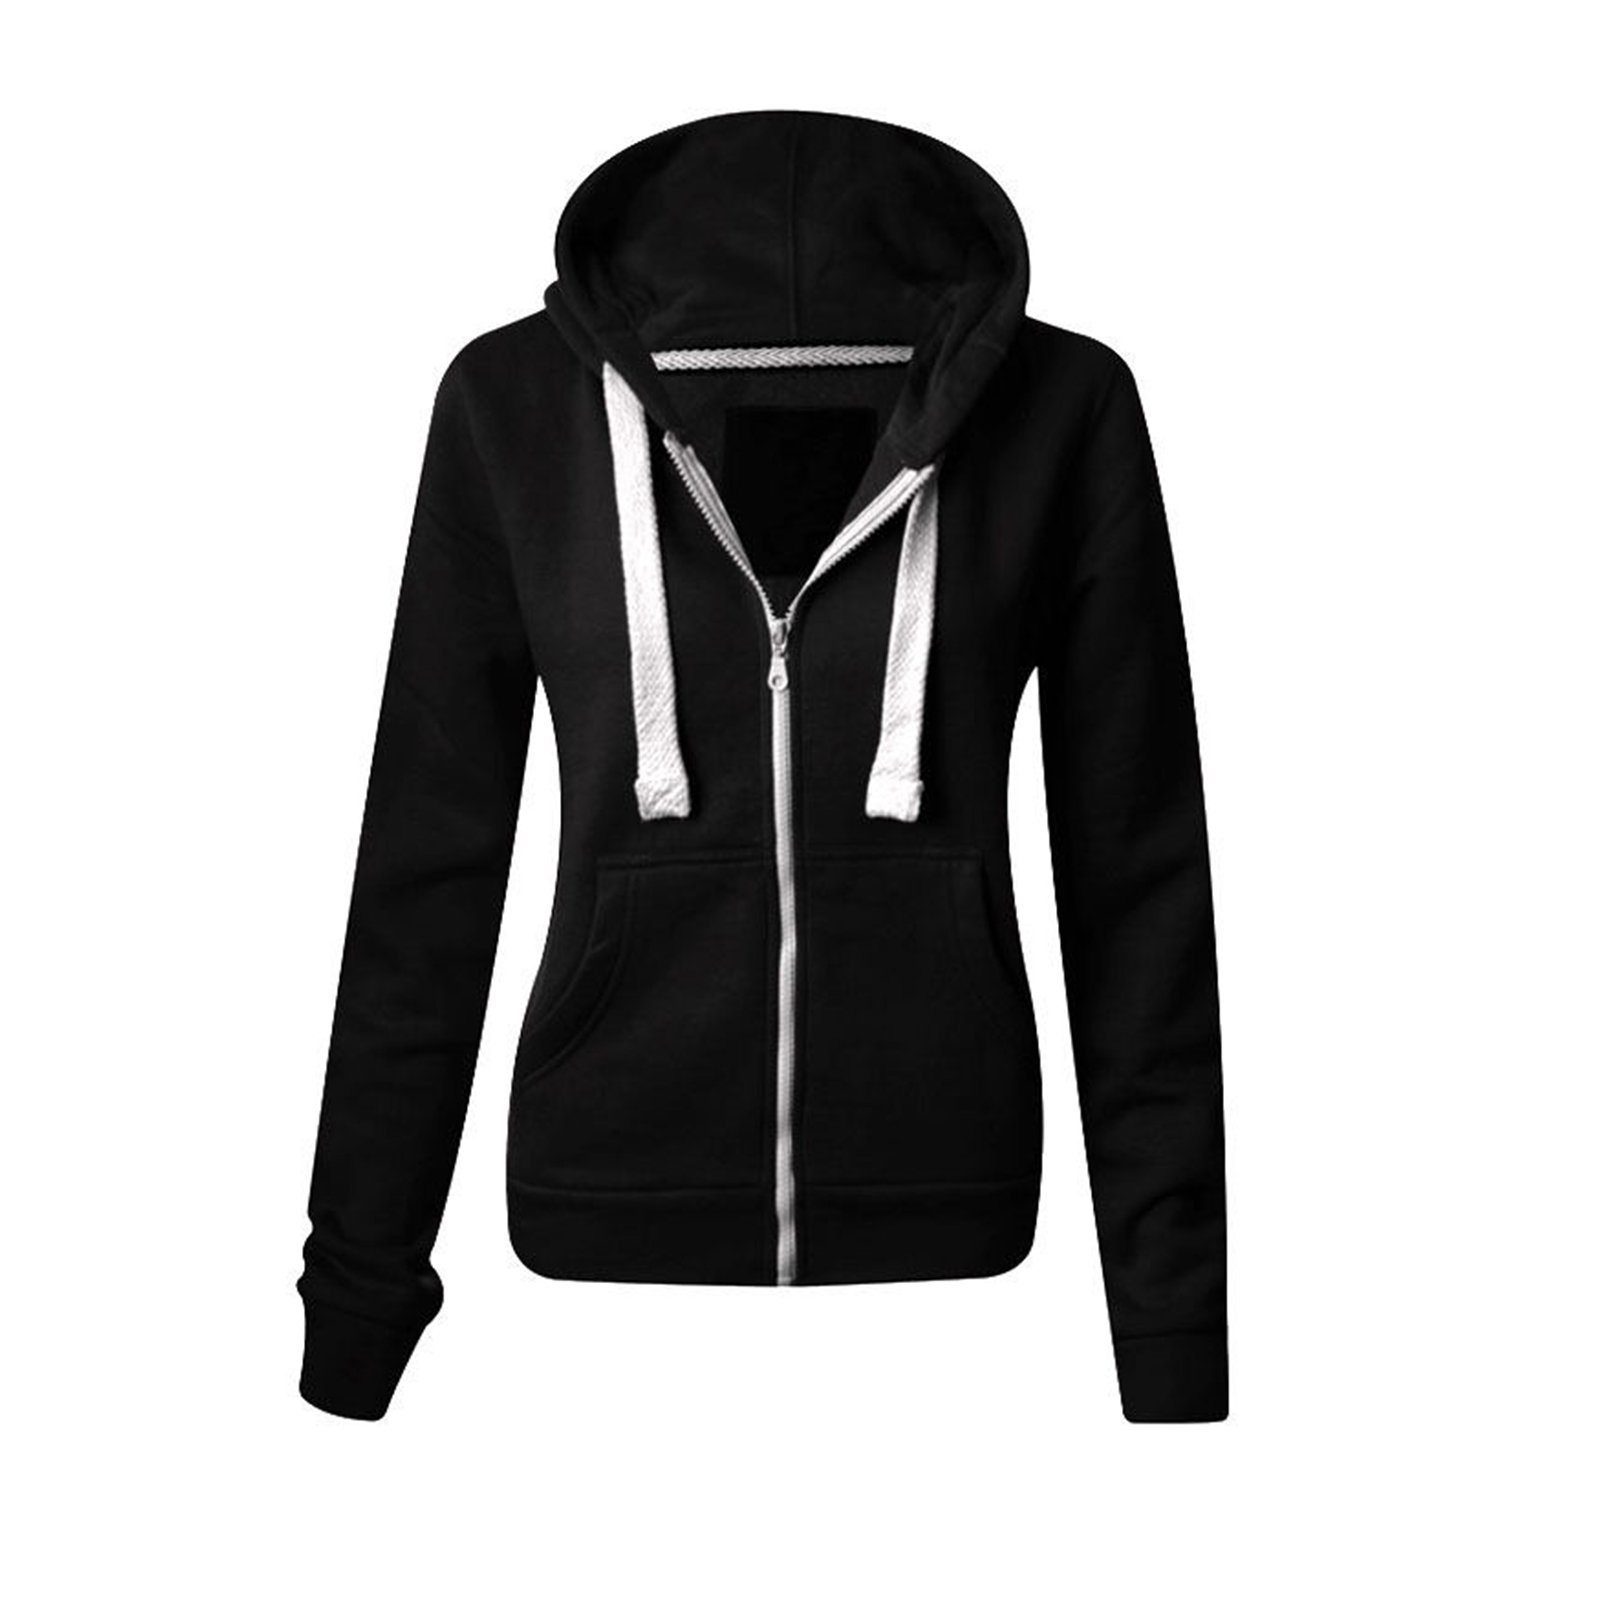 Ladies Plain Zip Up Hoodie Womens Fleece Hooded Top Long Sleeves Front Pockets Soft Stretchable Comfortable Plus Sizes Small to XXXXXXXL (UK 6-30)